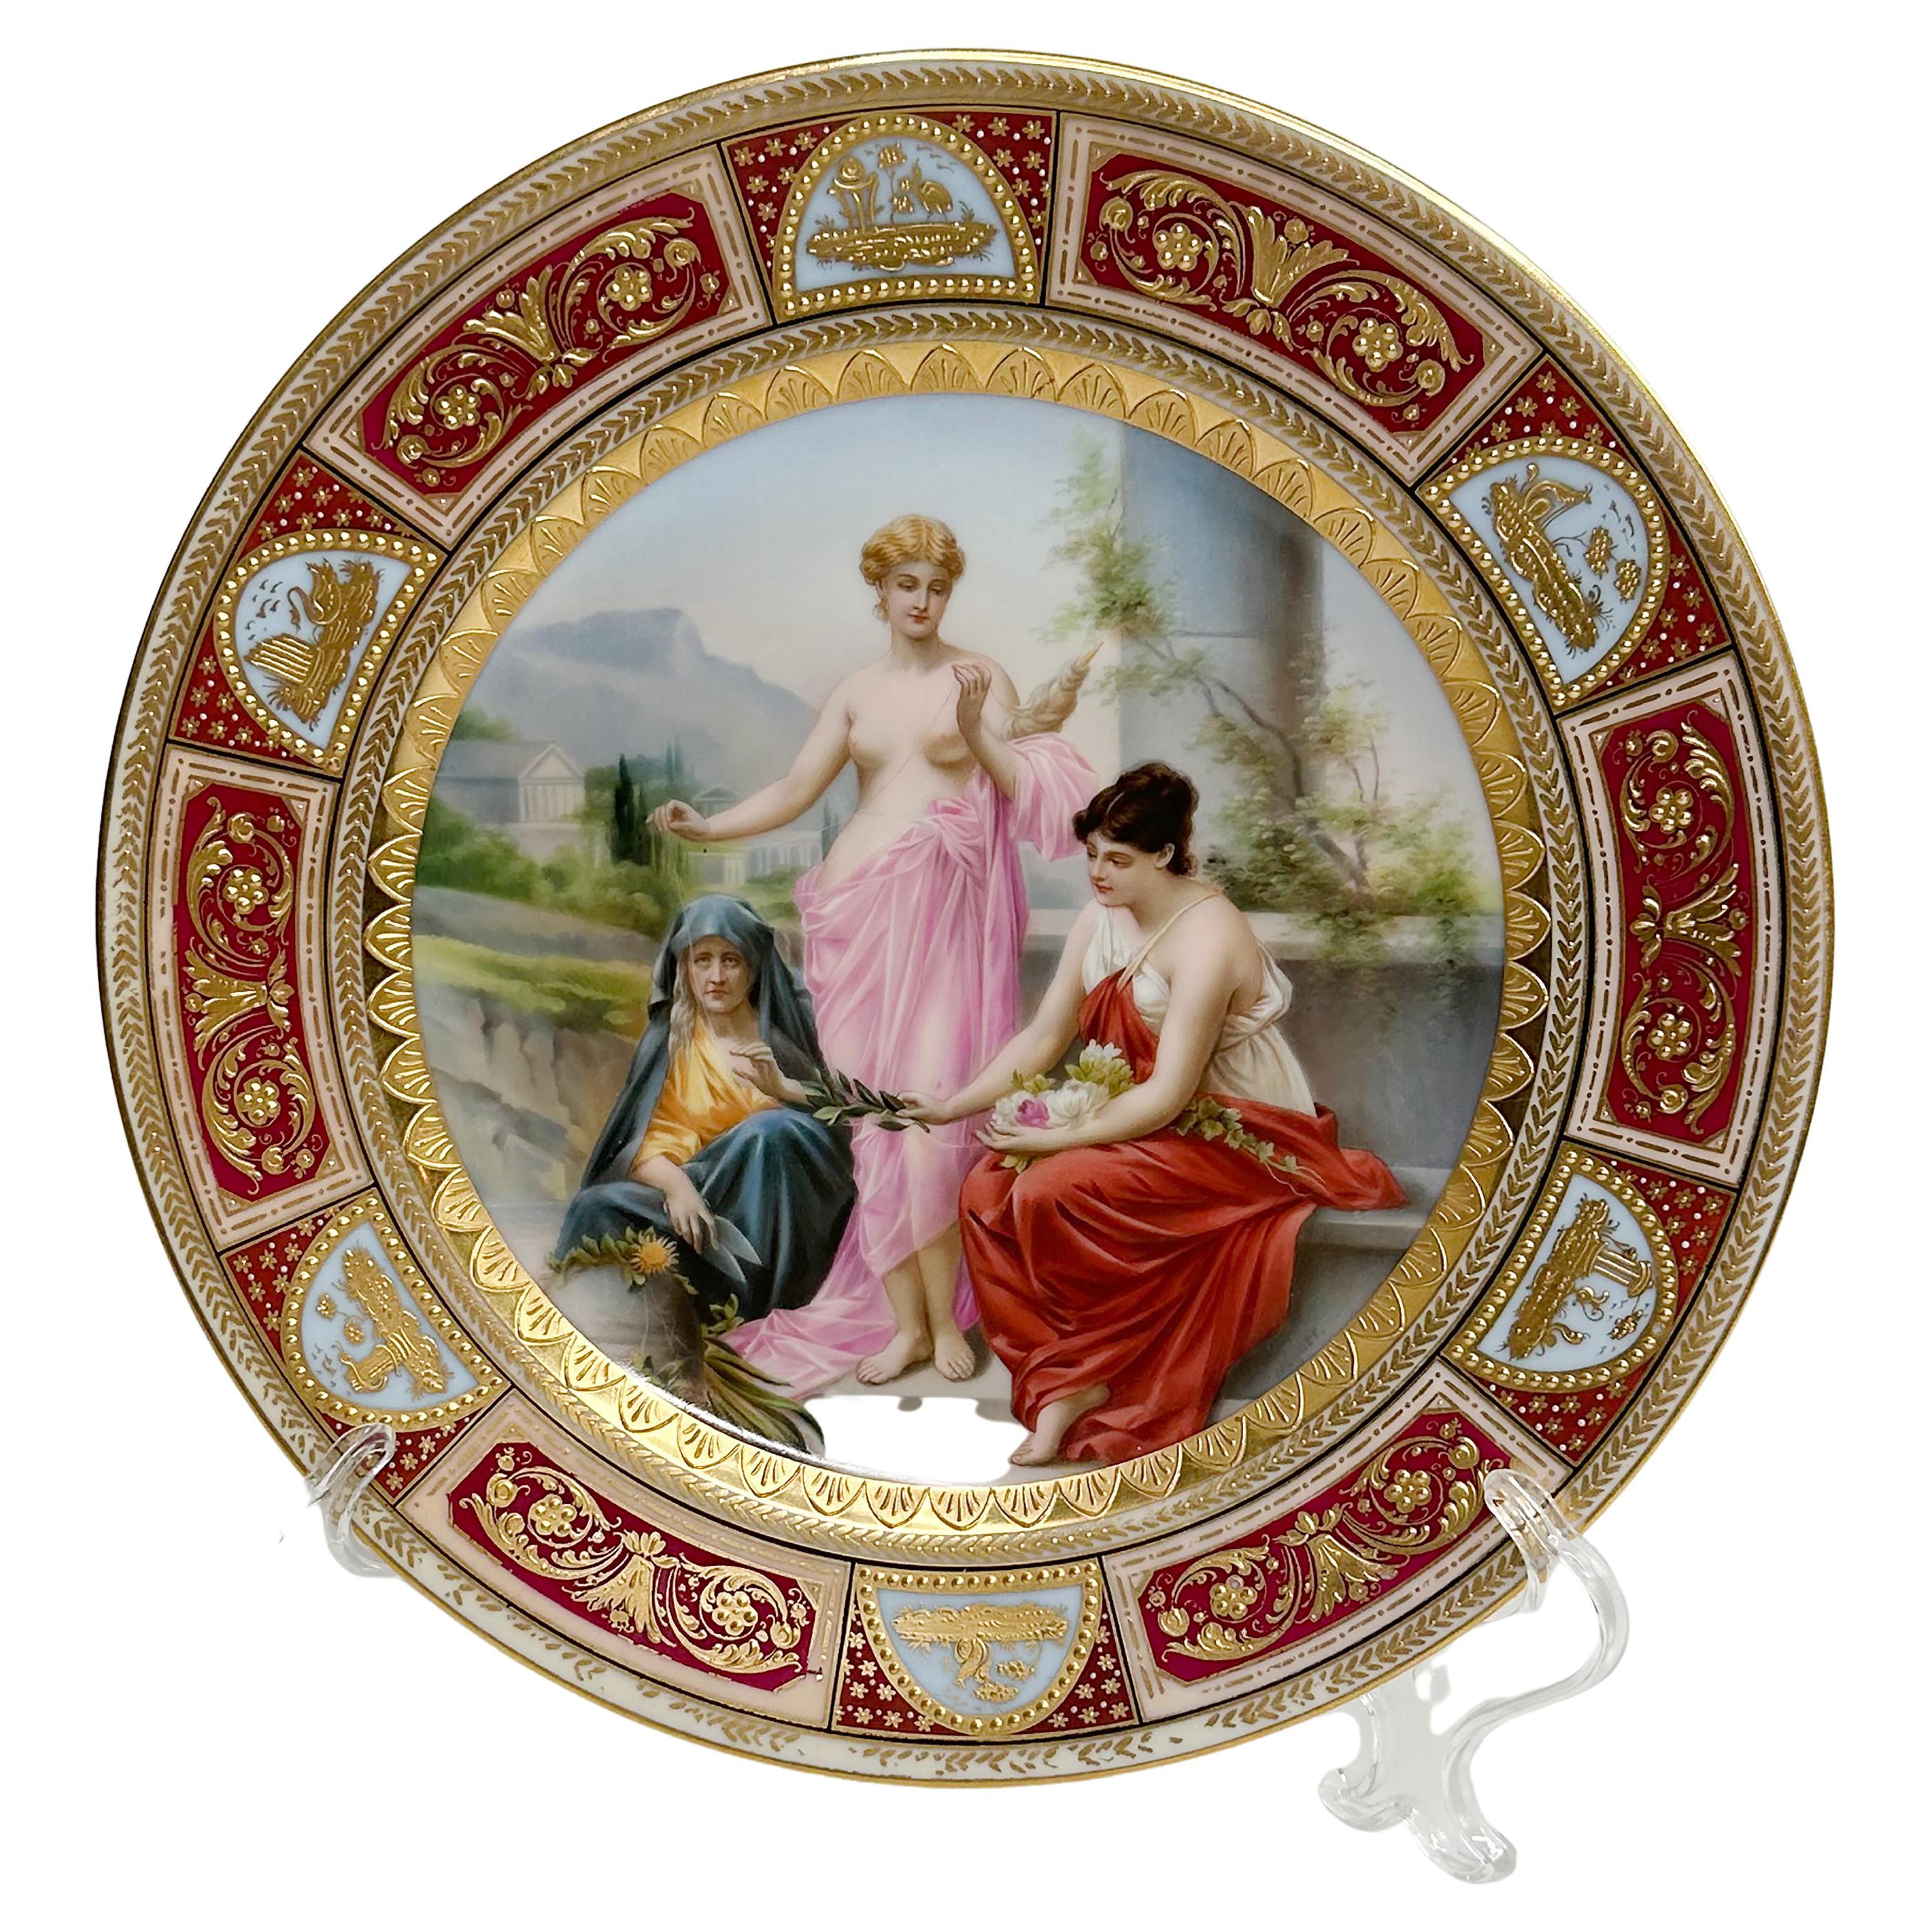 A beautifully hand painted and gilt porcelain cabinet plate. This is a reproduction of a depiction of Die Parzen (The Three Fates). Of the Imperial Viennese period. Likely made in Germany per the marking on the back. Acrylic stand not